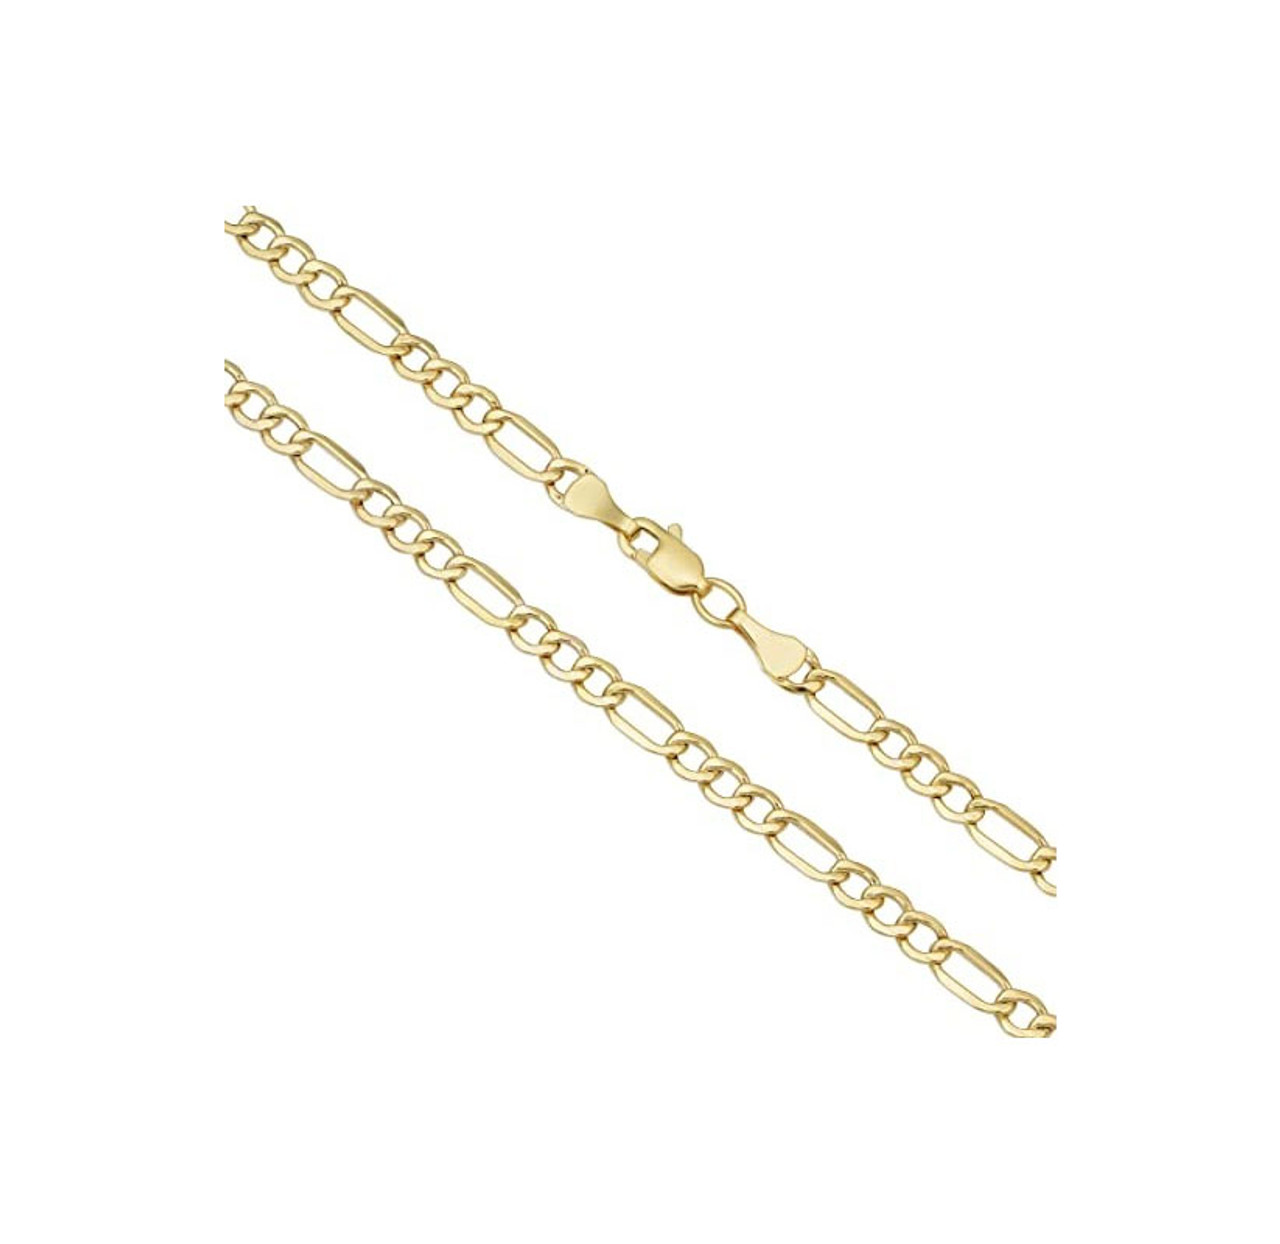 10K Gold Italian 1.5mm Figaro Chain Necklace product image